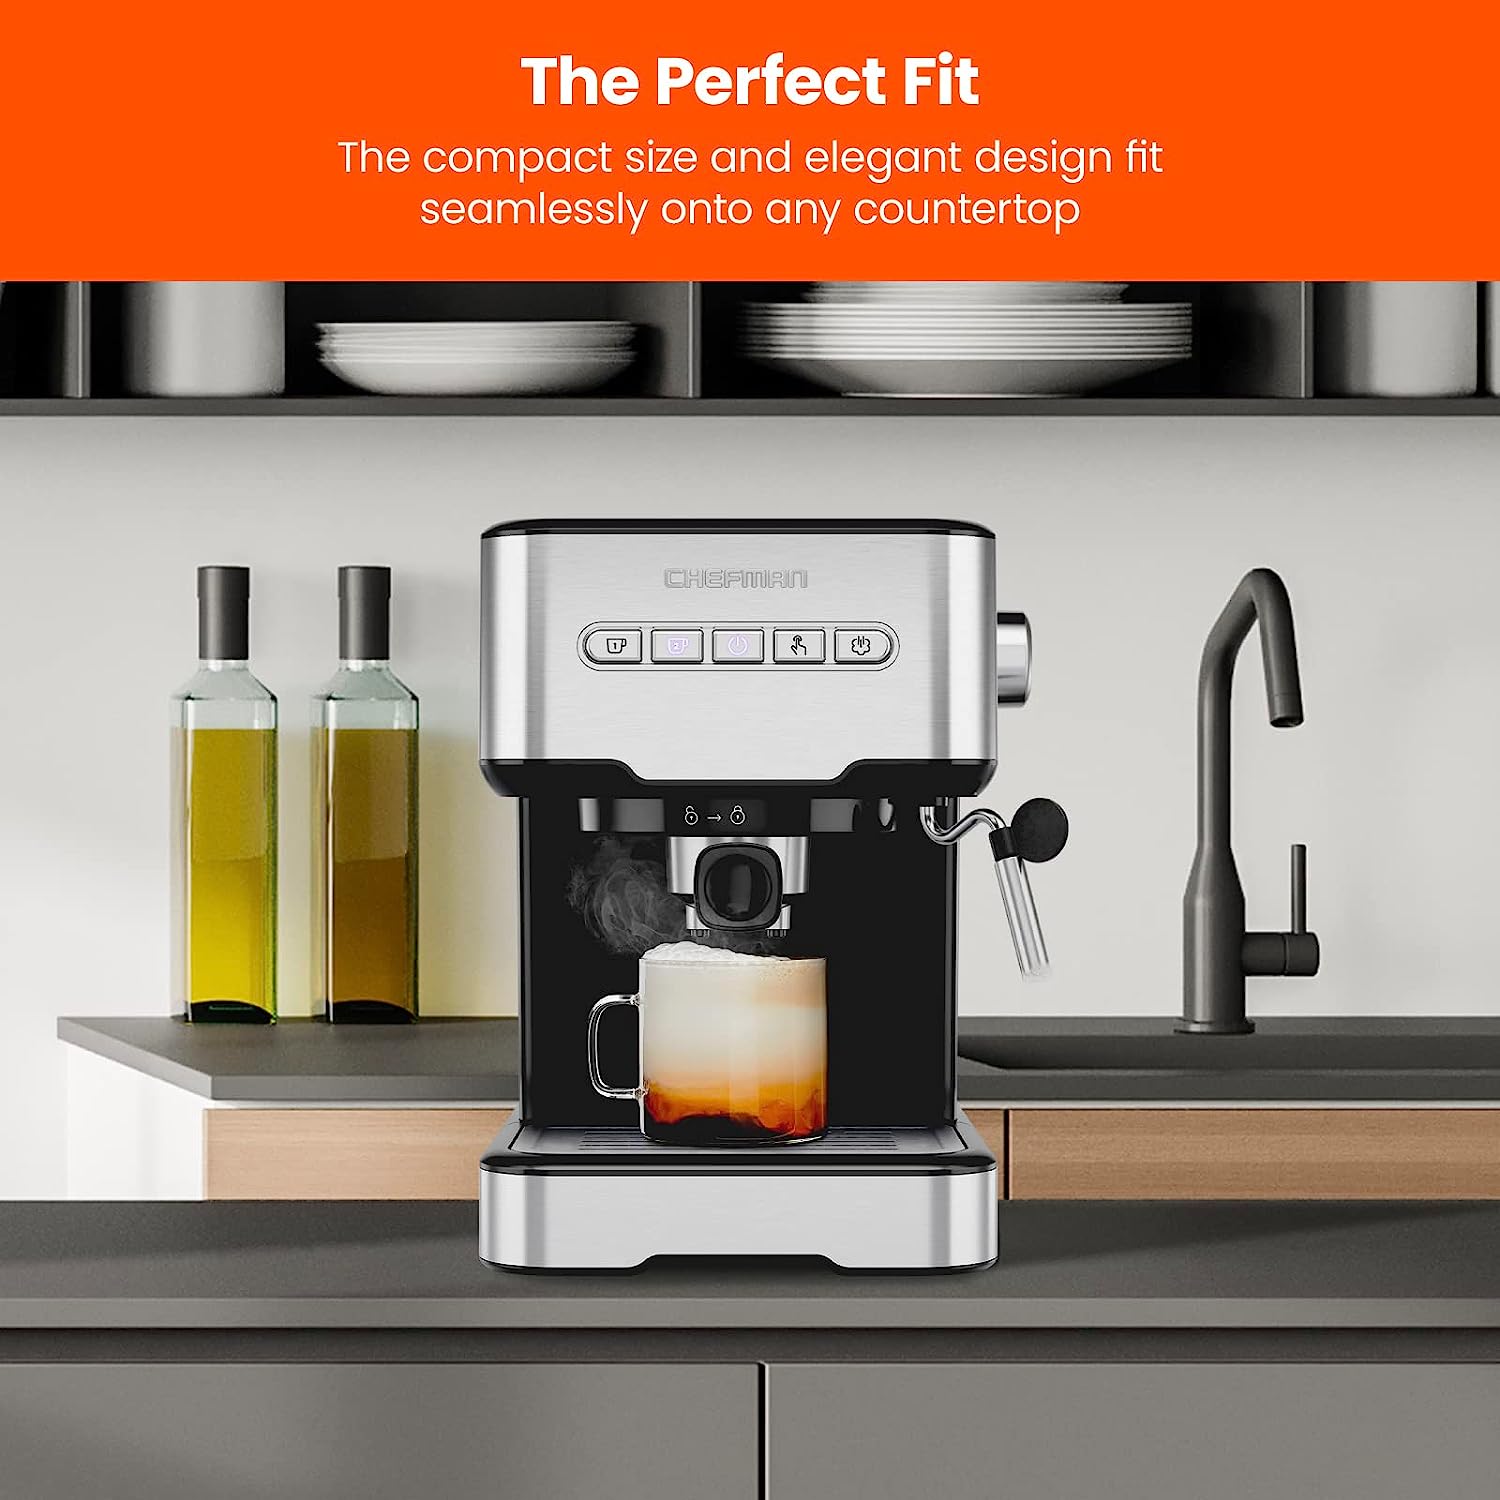 https://bigbigmart.com/wp-content/uploads/2023/07/Chefman-6-in-1-Espresso-Machine-with-Steamer-One-Touch-Single-or-Double-Shot-Espresso-Maker-Coffee-Maker-Cappuccino-Machine-Latte-Maker-Built-In-Milk-Frother-Coffee-Machine-Stainless-Steel3.jpg